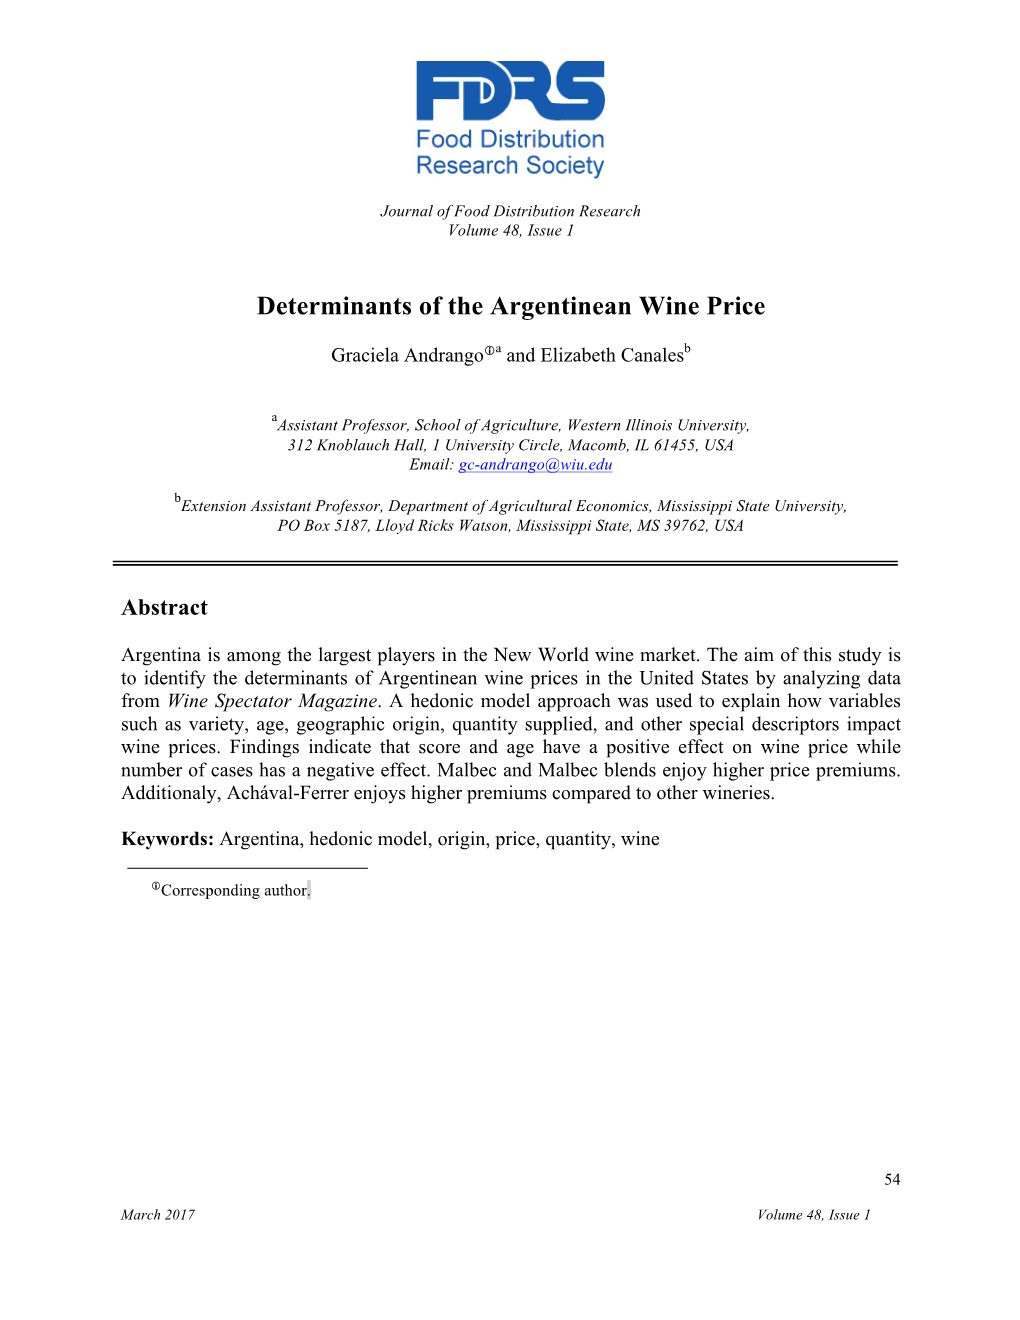 Determinants of the Argentinean Wine Price